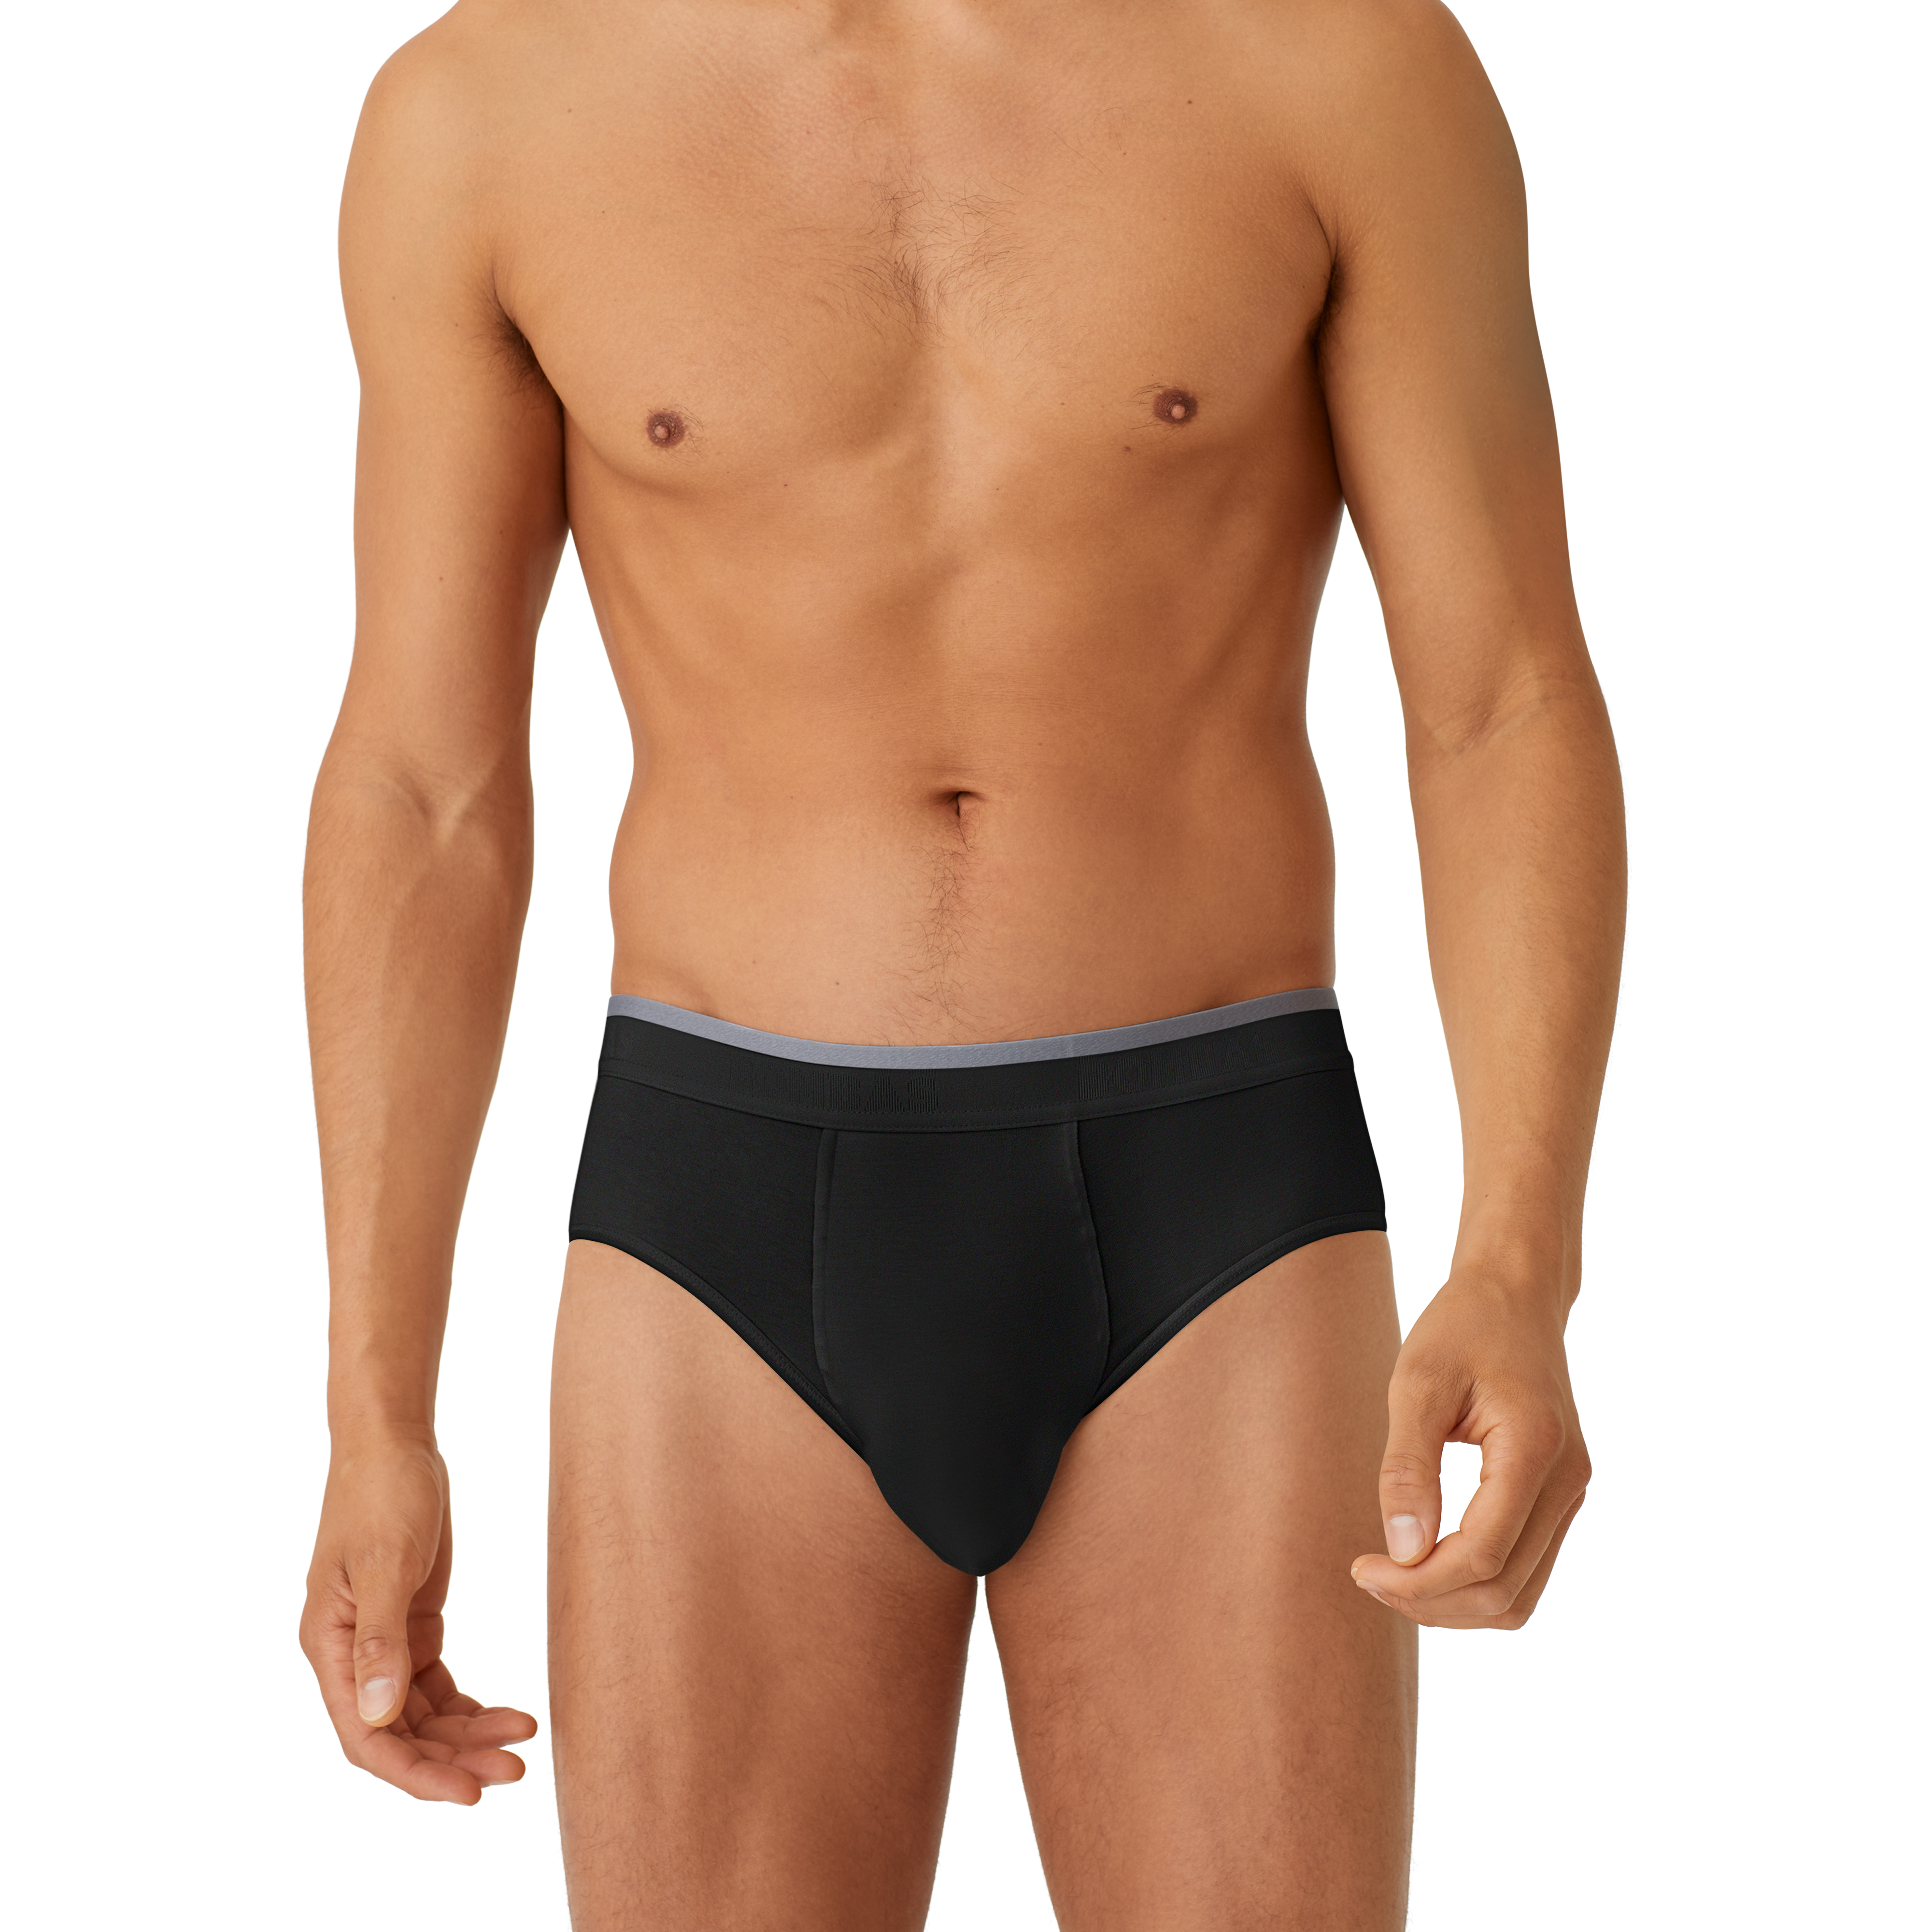 3-6 Men's Underwear Multipack Modal Cotton Briefs No Fly Covered Waistband  Plain - La Paz County Sheriff's Office Dedicated to Service